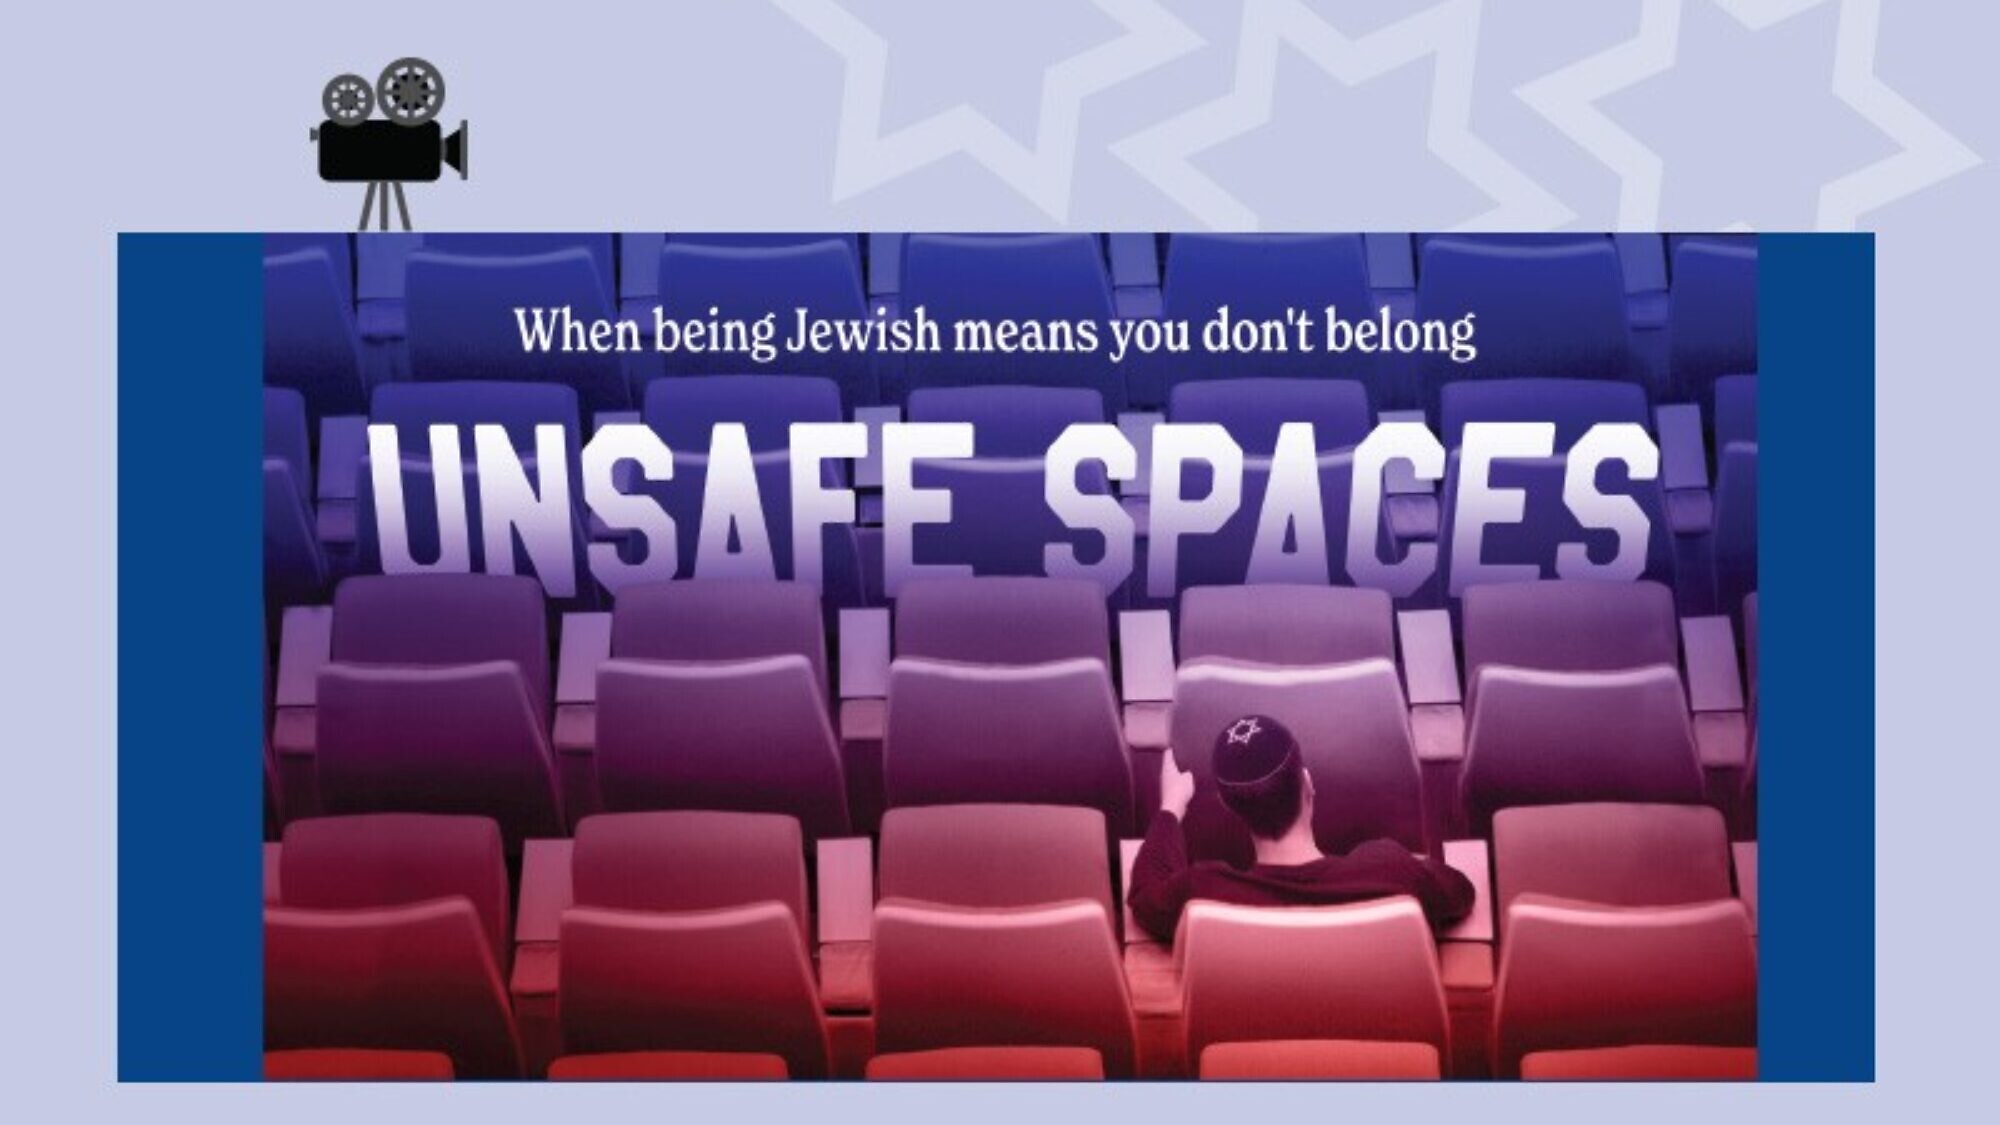 Unsafe Spaces marketing image. Credit: Lappin Foundation